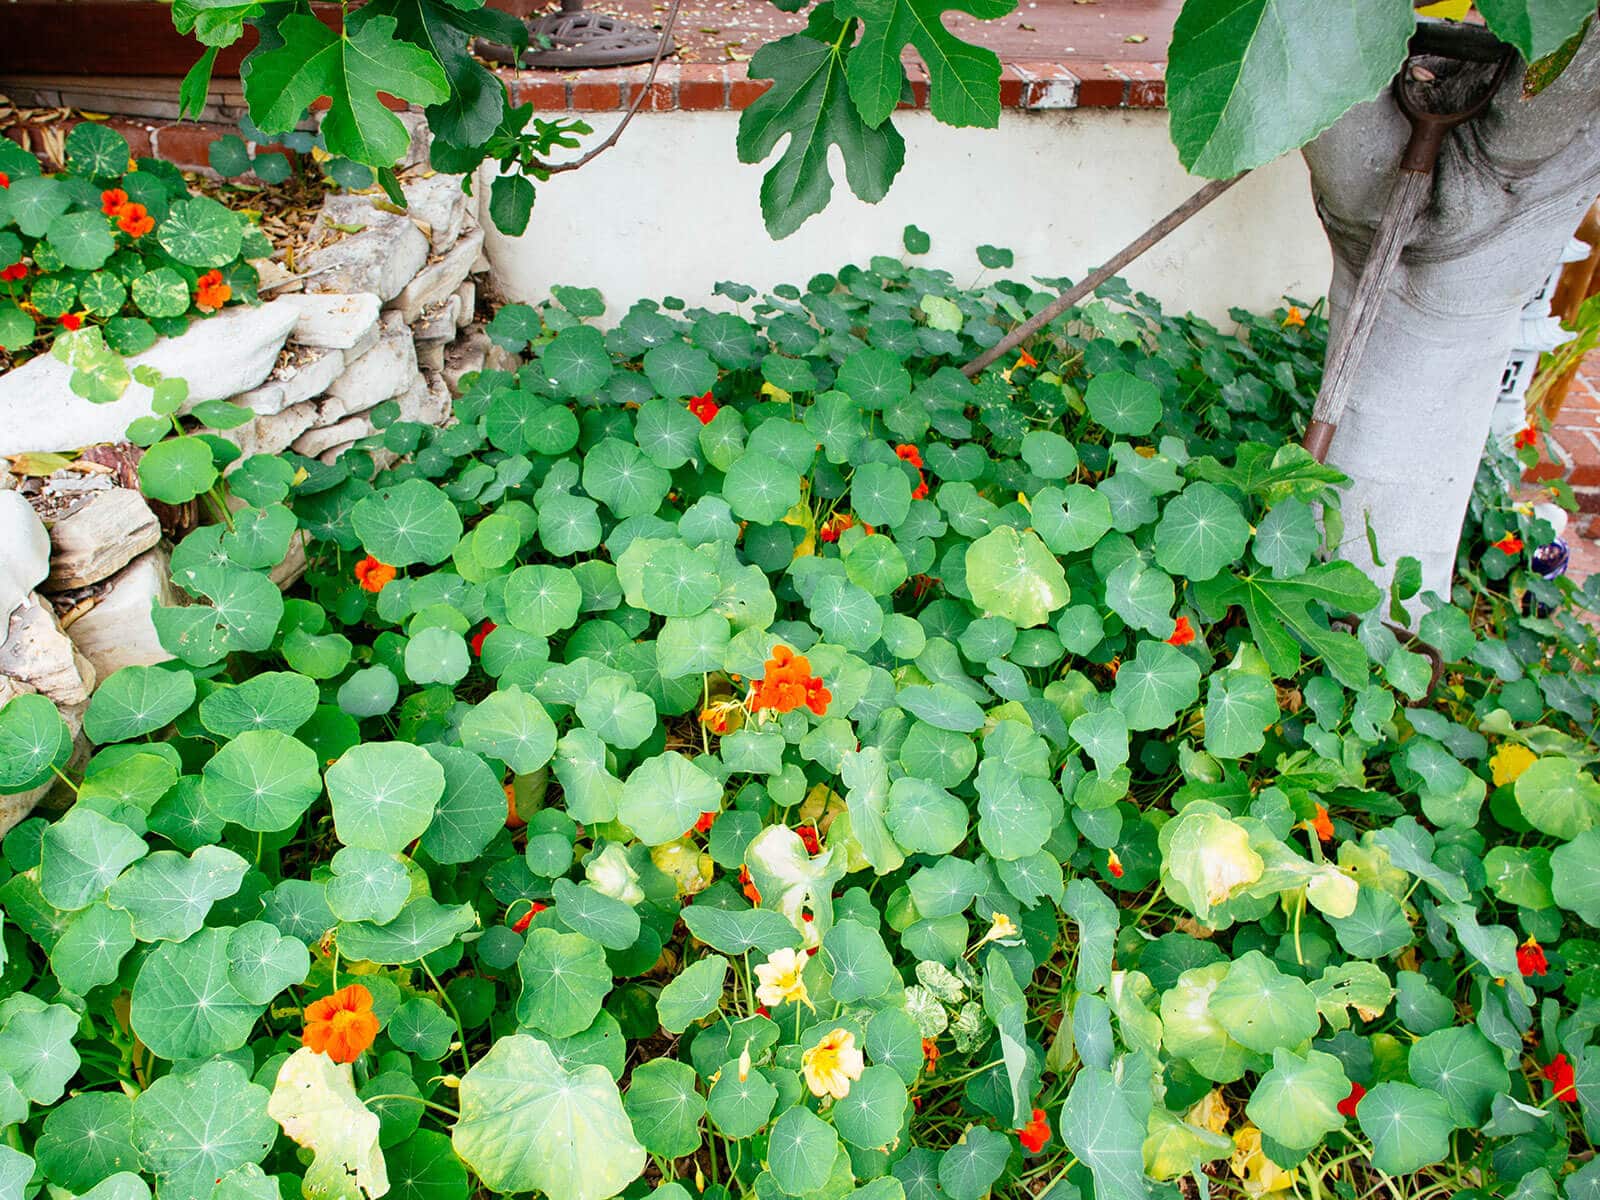 Plant nasturtiums as edible ground covers and trap crops in vegetable gardens